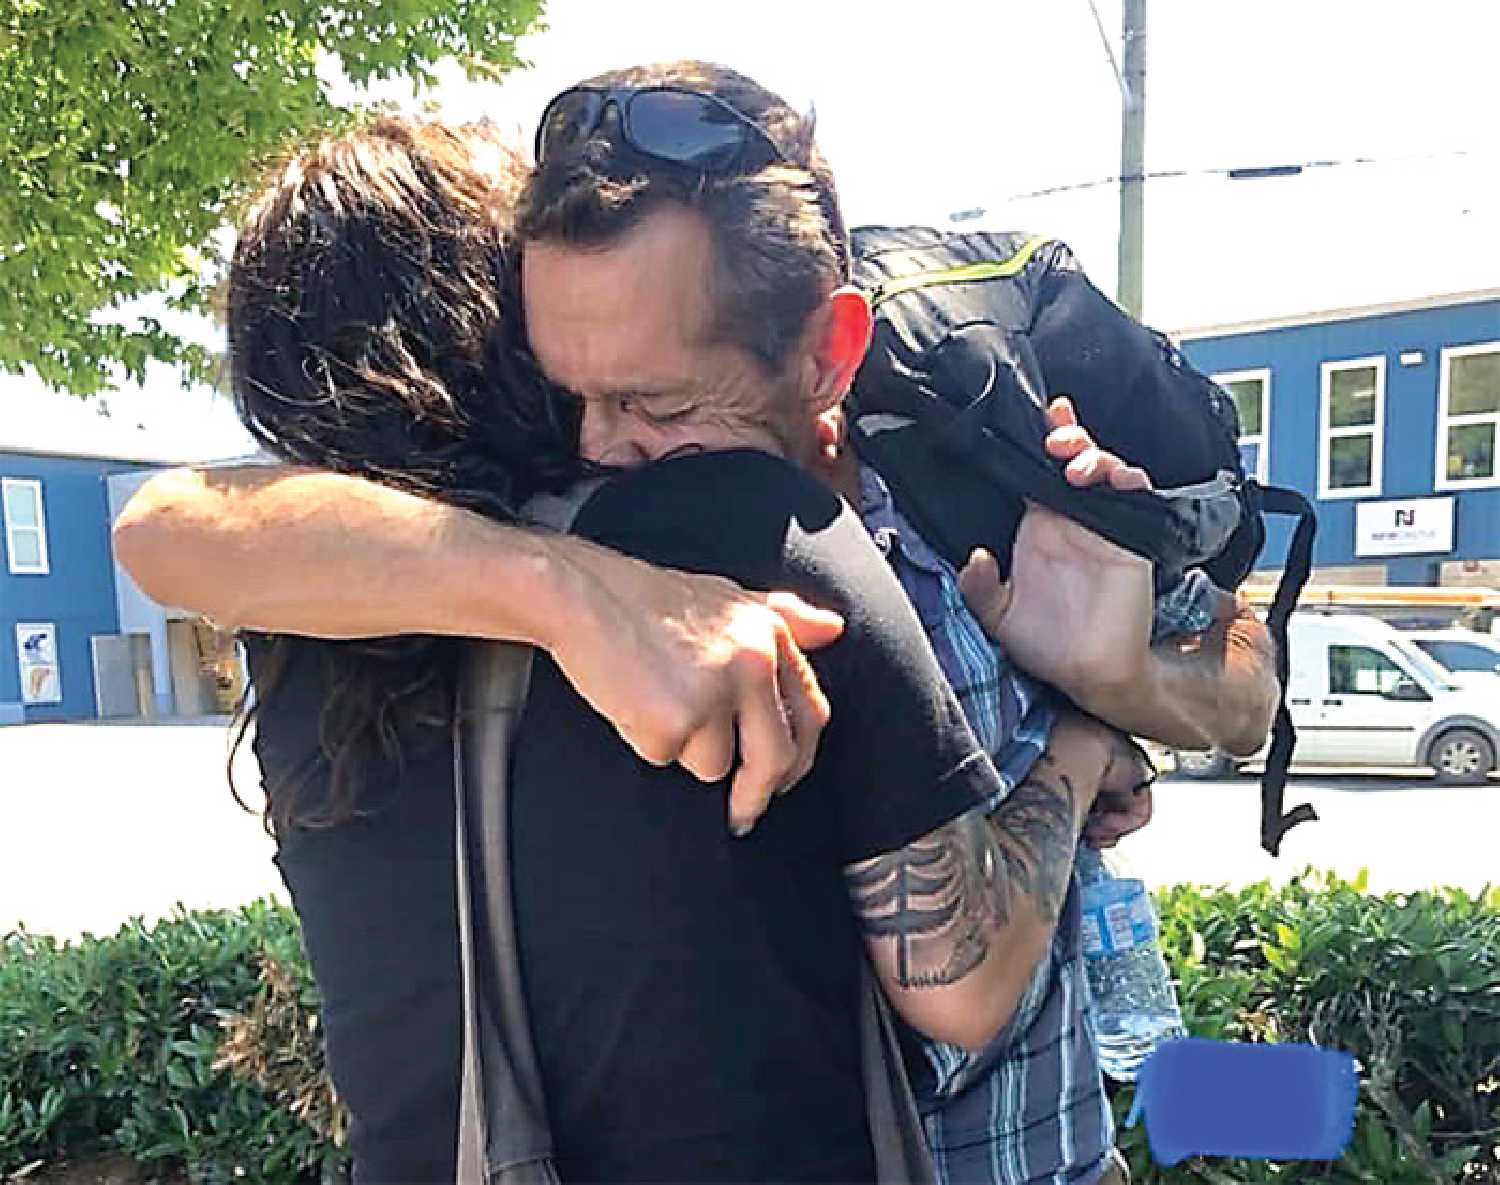 Throughout the years of continuously going back to Chilliwack, B.C. to help homeless people, there have been many people who told Lawless how grateful they are for her kind services. 